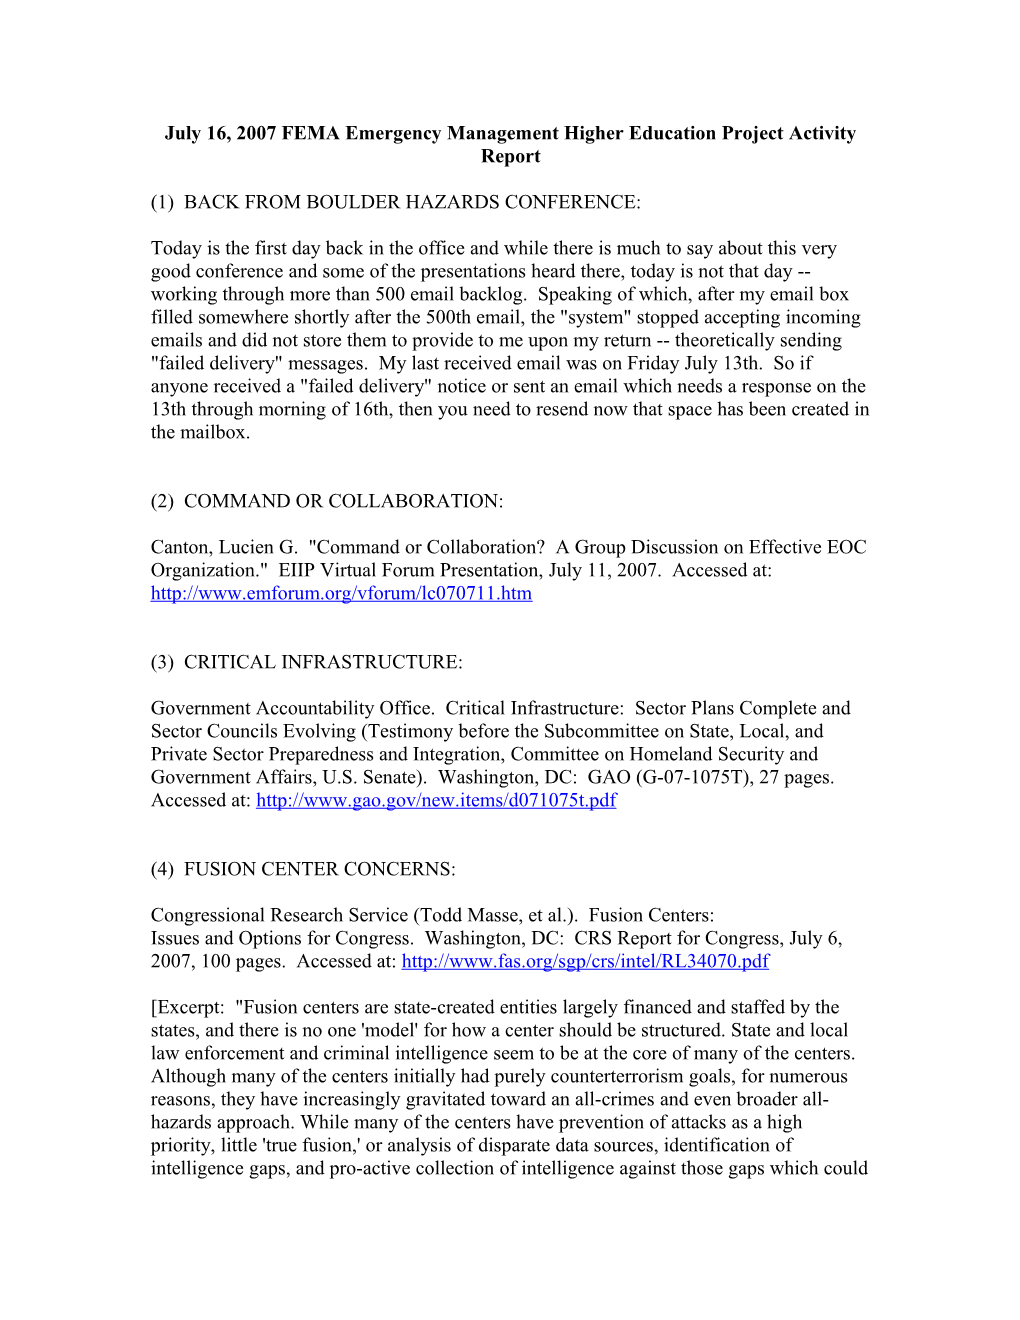 July 16, 2007 FEMA Emergency Management Higher Education Project Activity Report